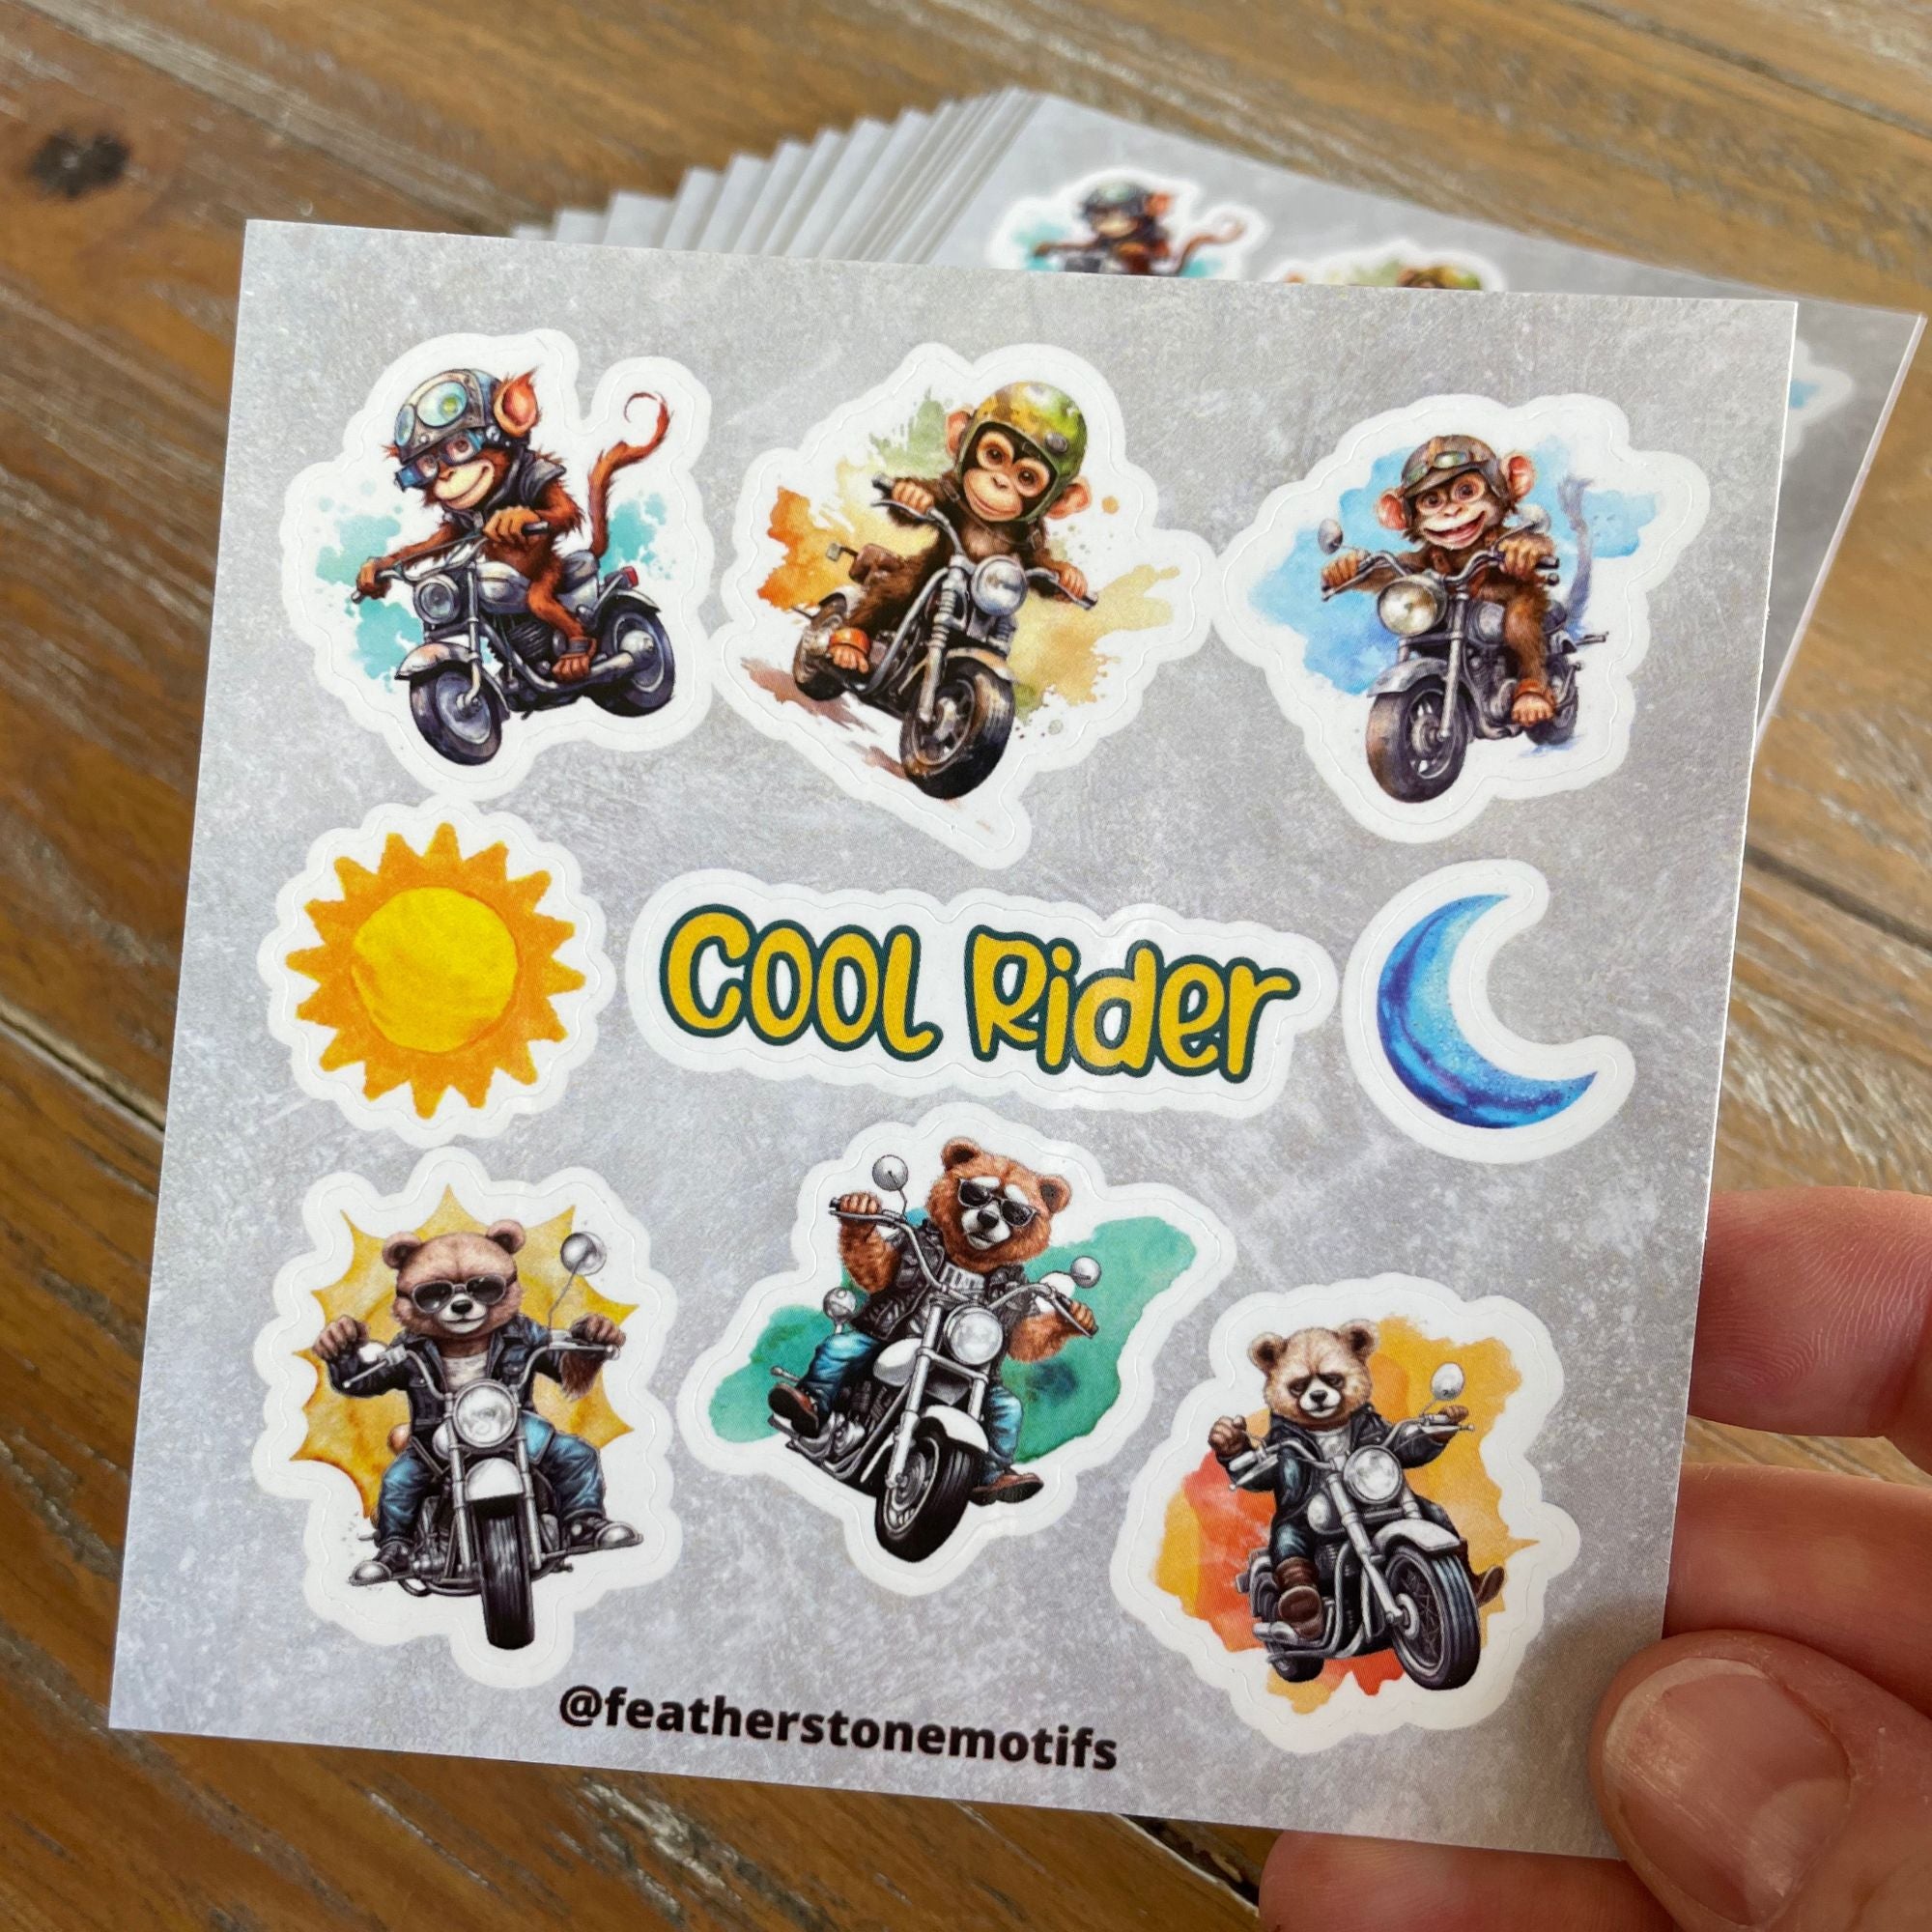 This image shows the Cool Rider mini sheet